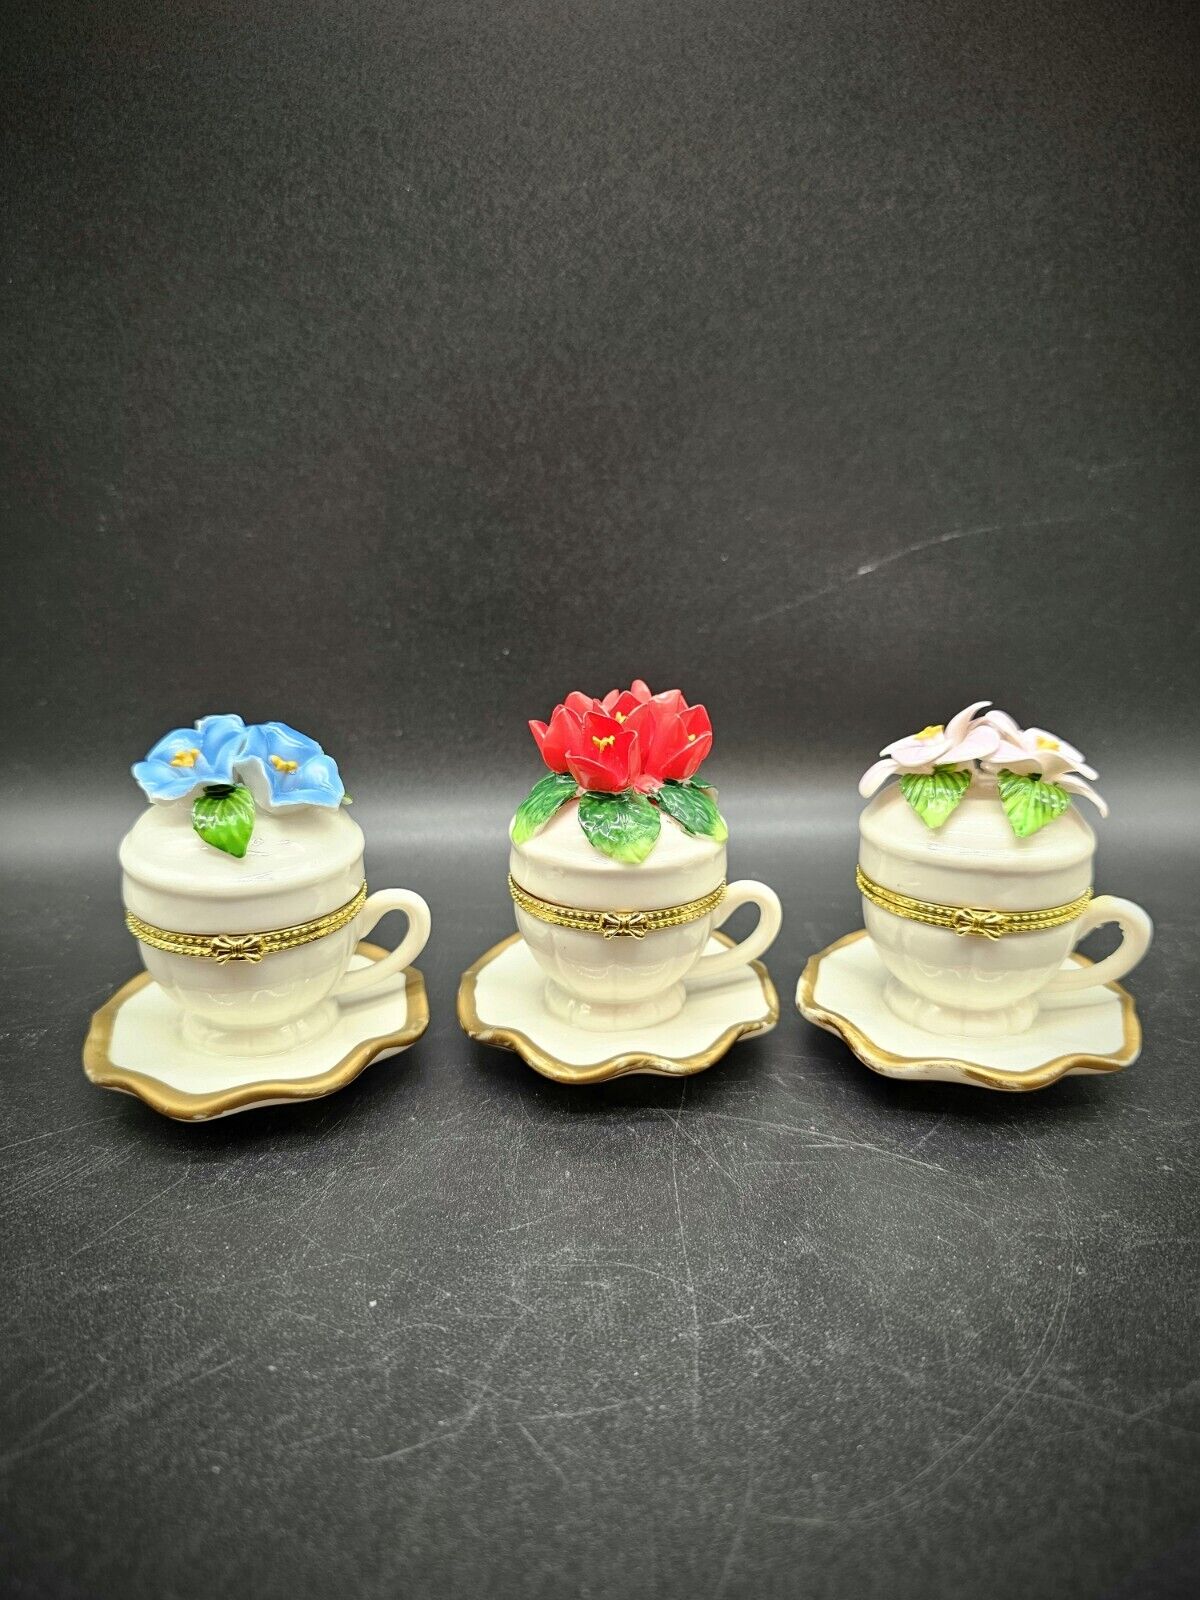 Vintage WMG Teacup Hinged Trinket Boxes Lot Of 3 With Flowers Boho Cottage Chic